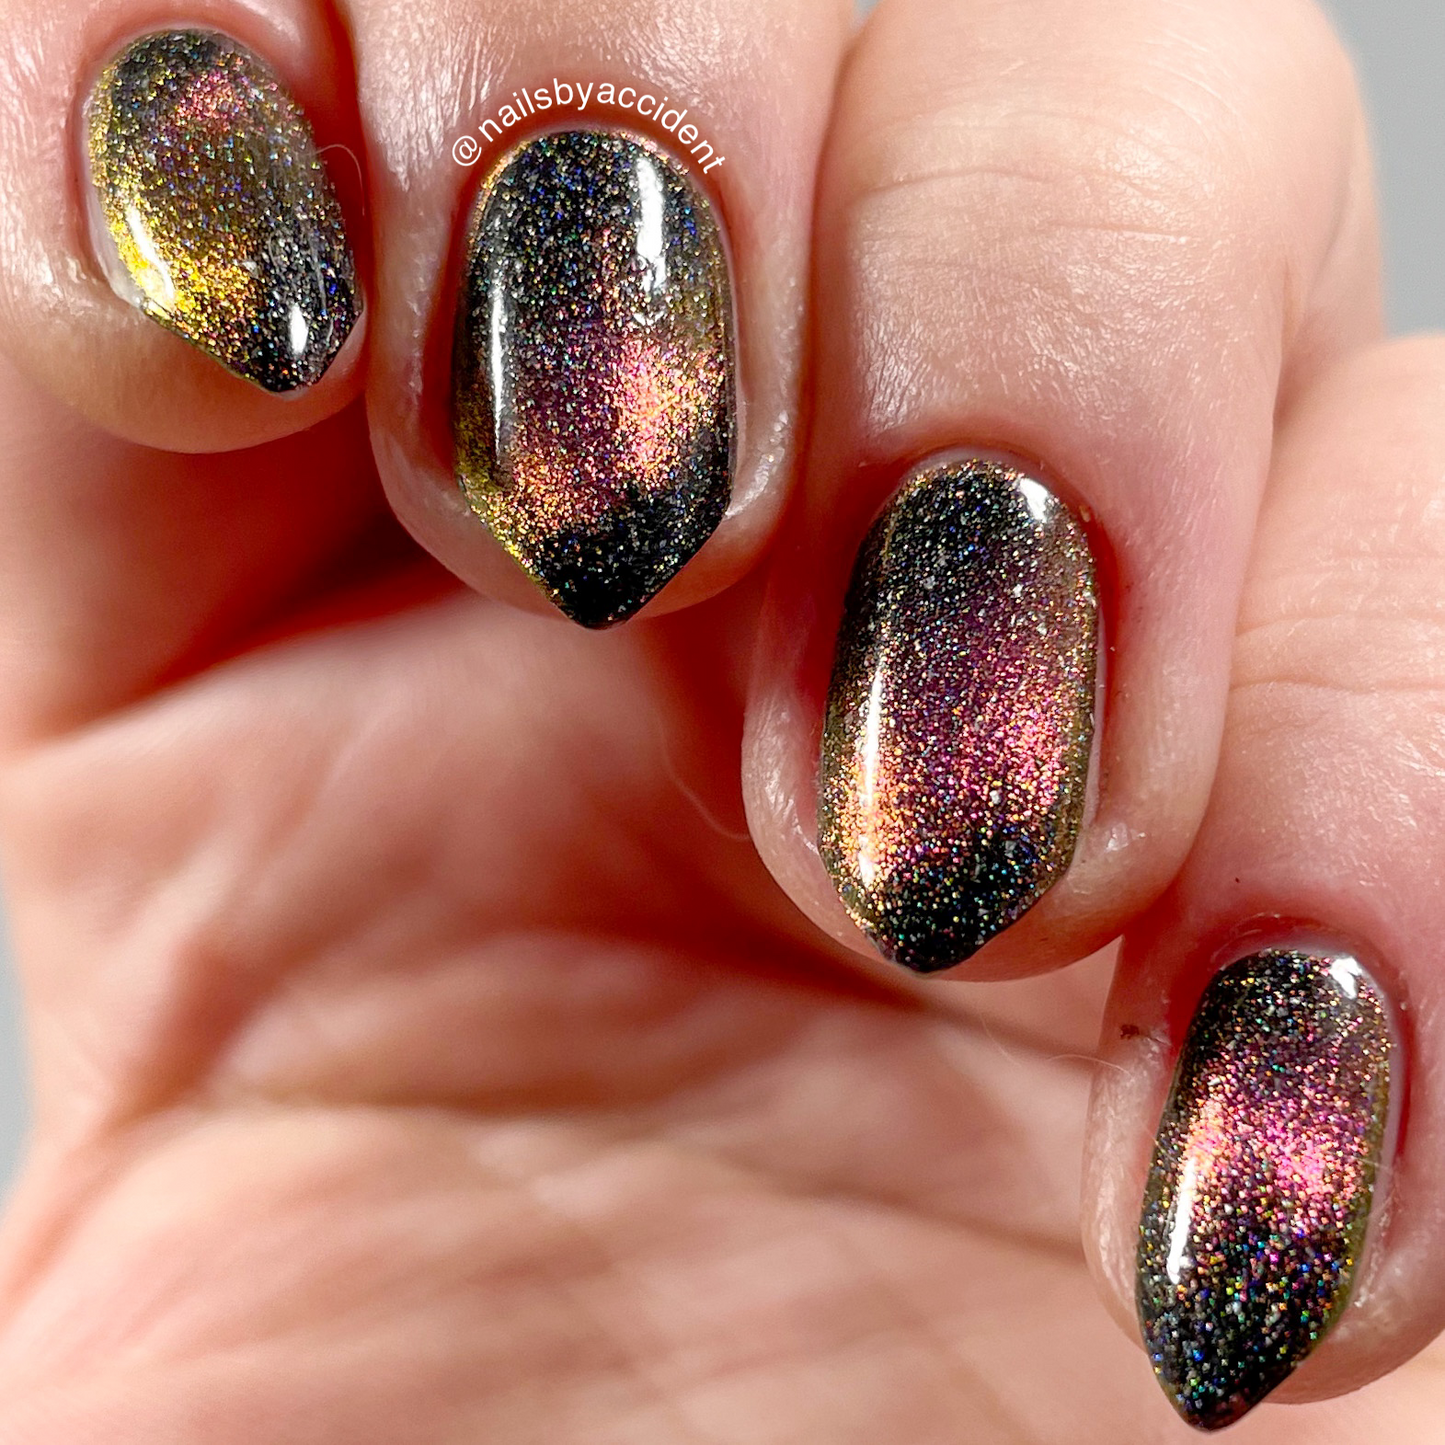 Blazar - Rose Gold/Bronze/Green Magnetic Holographic Nail Polish - Astronomical 2 Collection - Dam